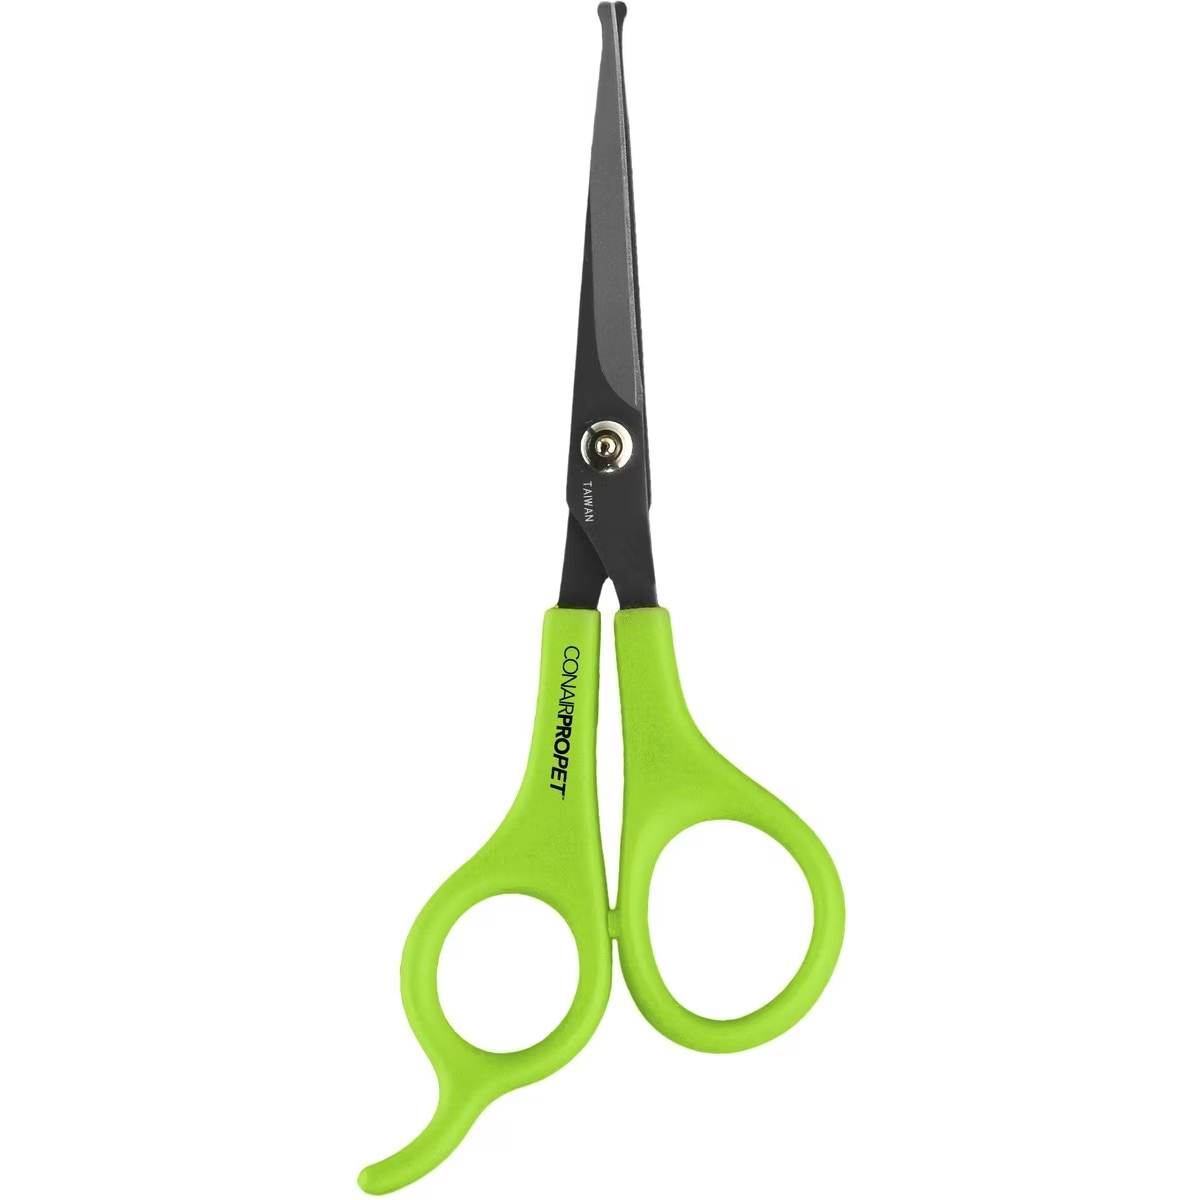 ConairPROPET Dog Rounded-Tip Shears